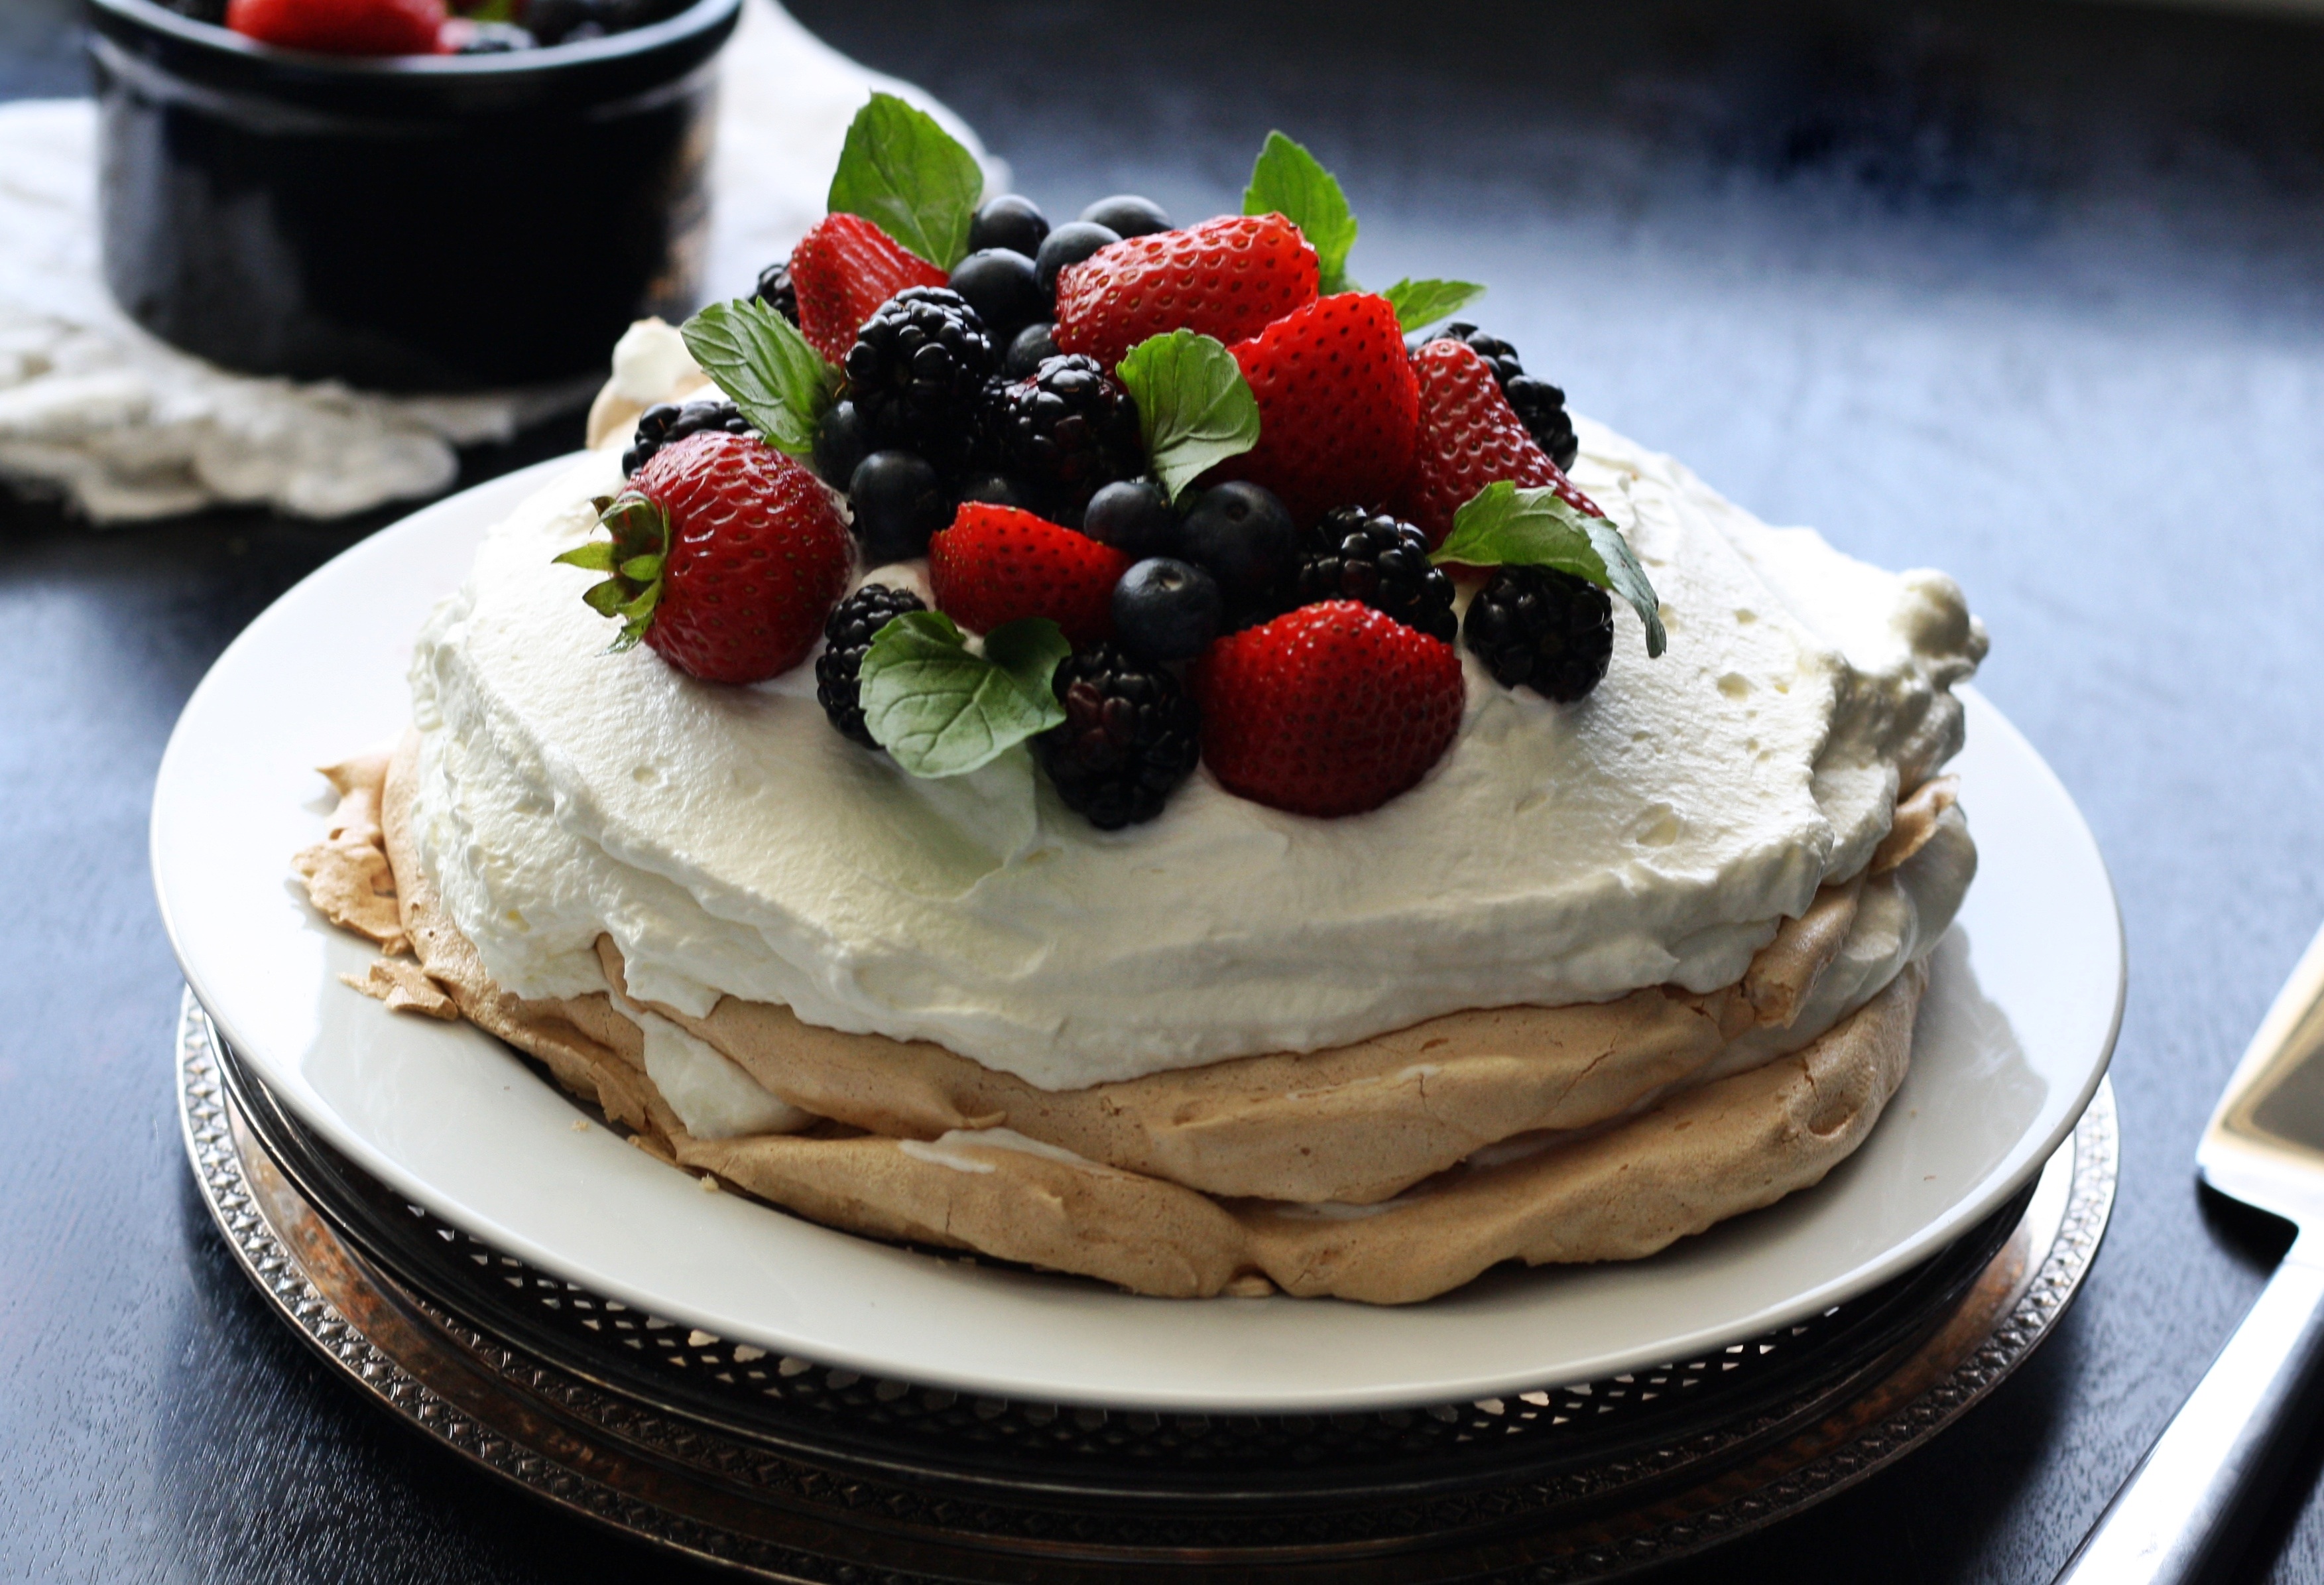 88226 Screensavers and Wallpapers Cream for phone. Download food, desert, berries, cream, pancakes pictures for free